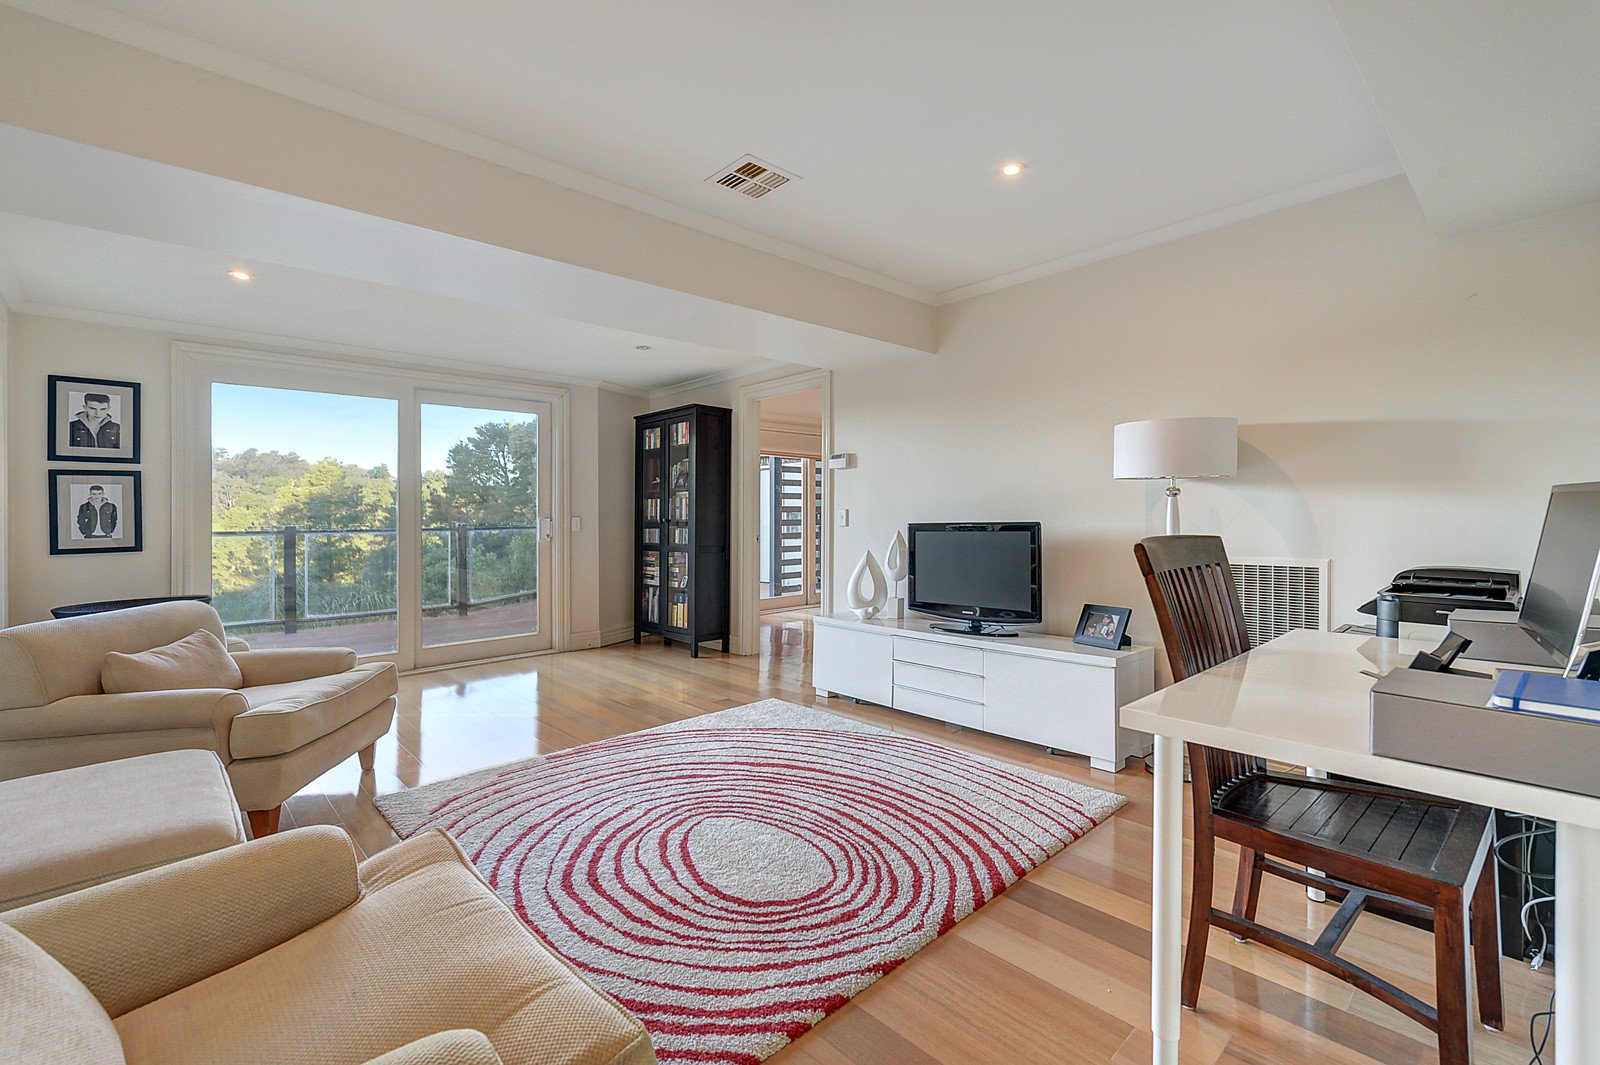 42-44 Frogmore Crescent, Park Orchards image 5